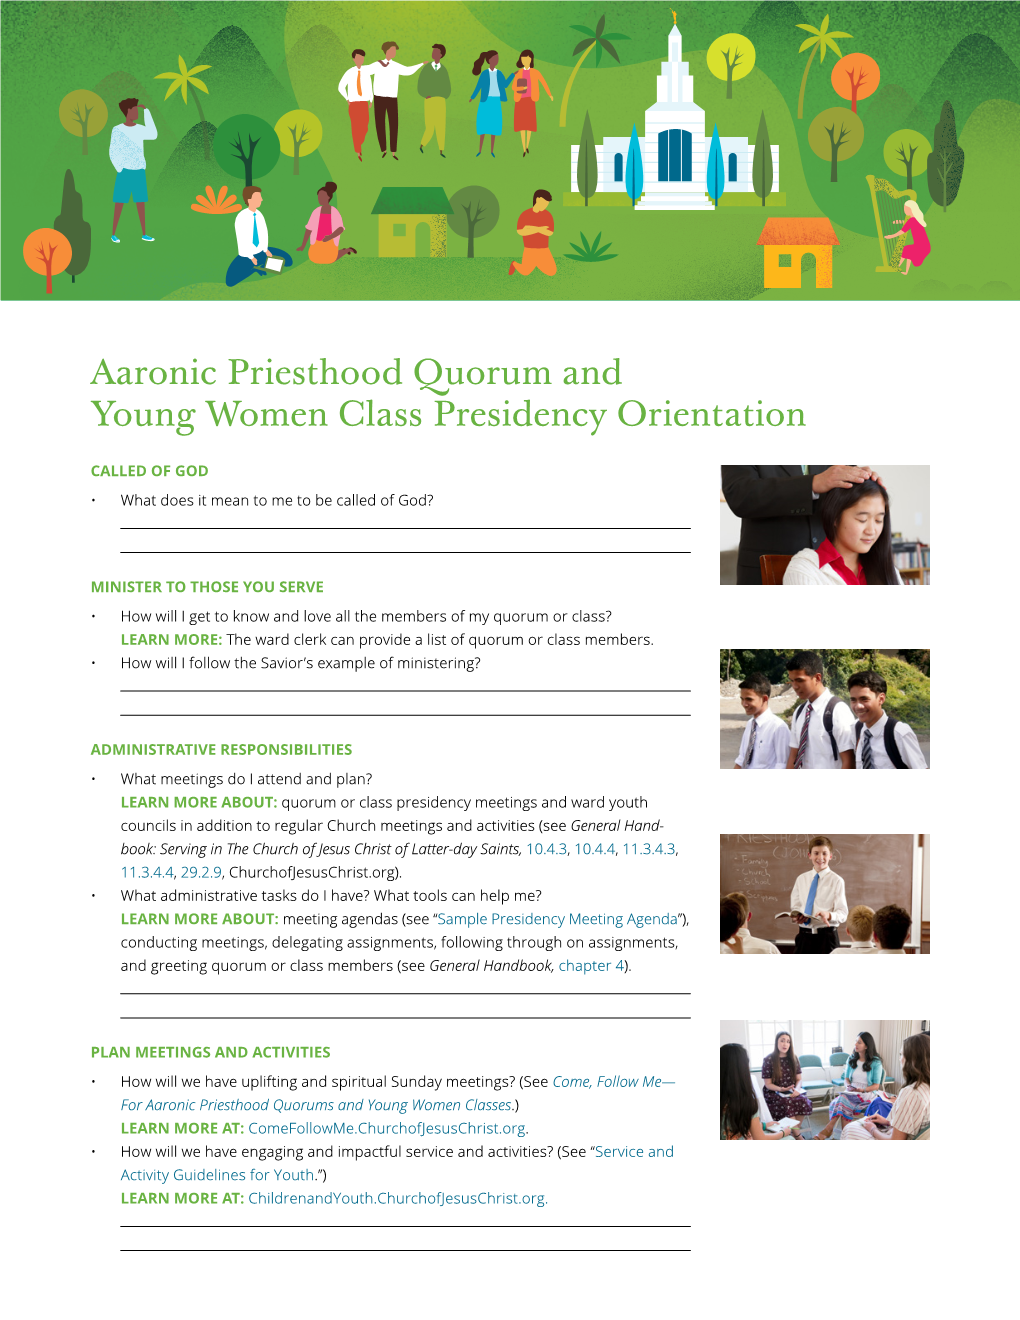 Aaronic Priesthood Quorum and Young Women Class Presidency Orientation